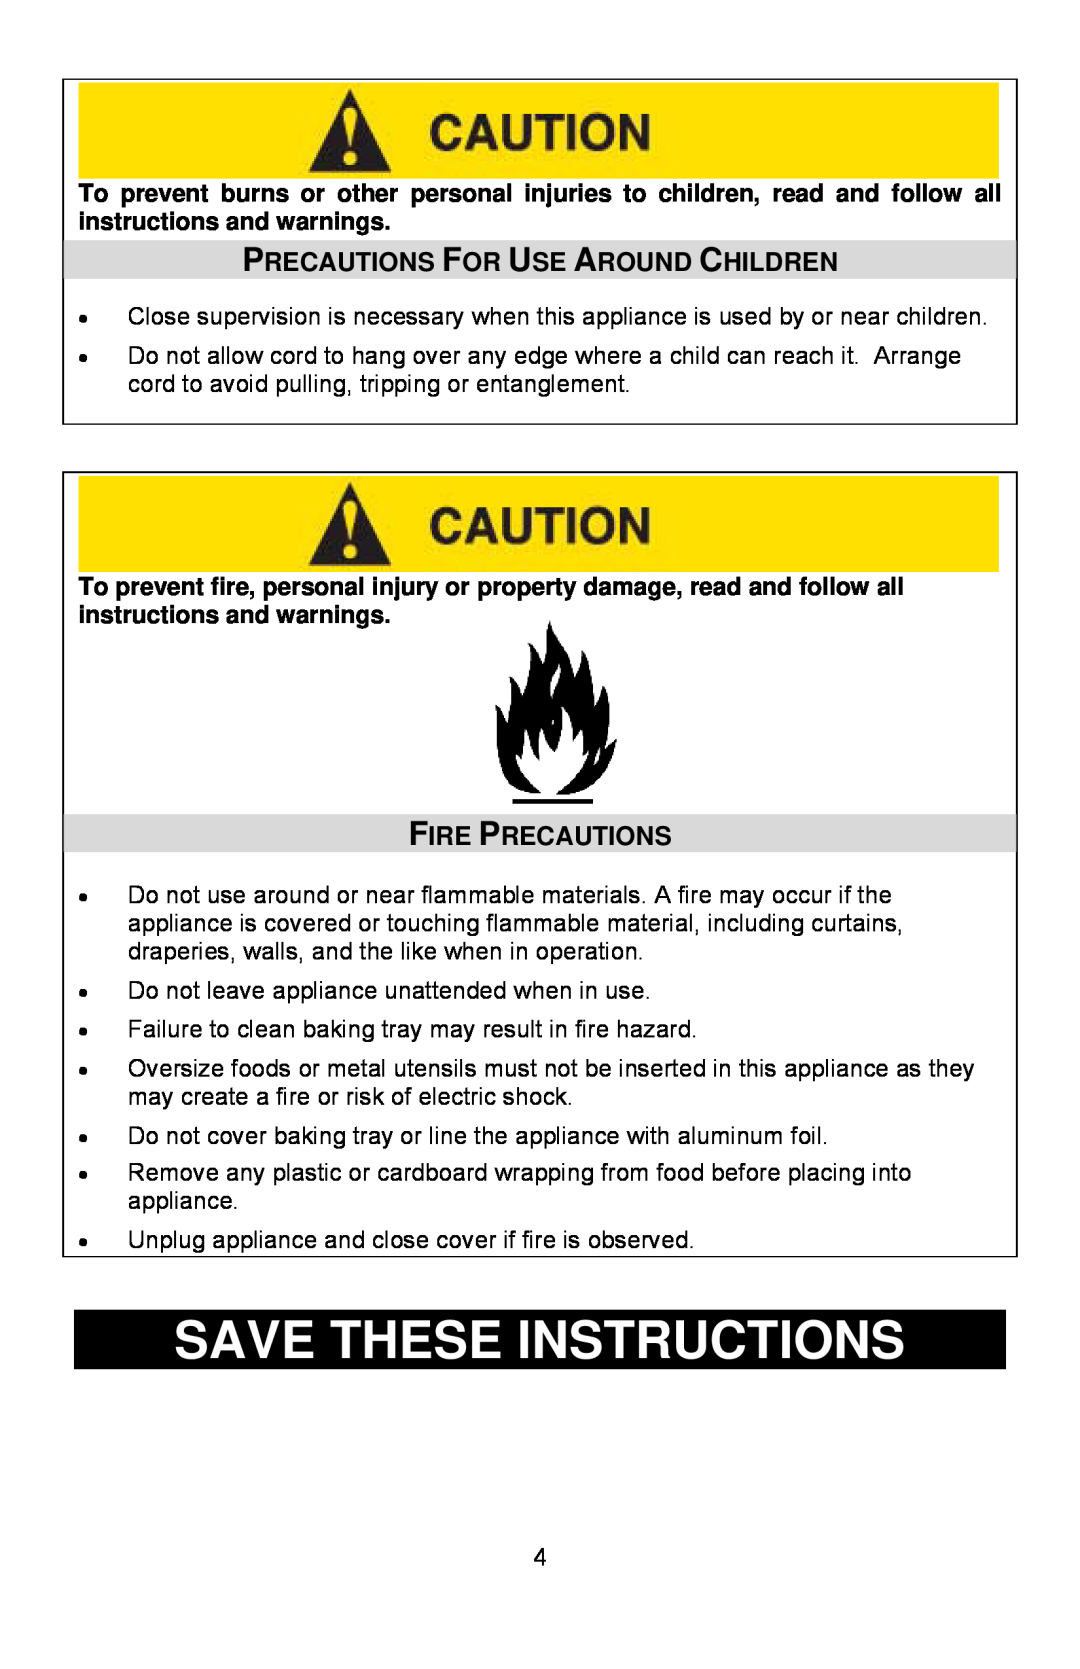 West Bend Rotary Oven instruction manual Save These Instructions, Precautions For Use Around Children, Fire Precautions 